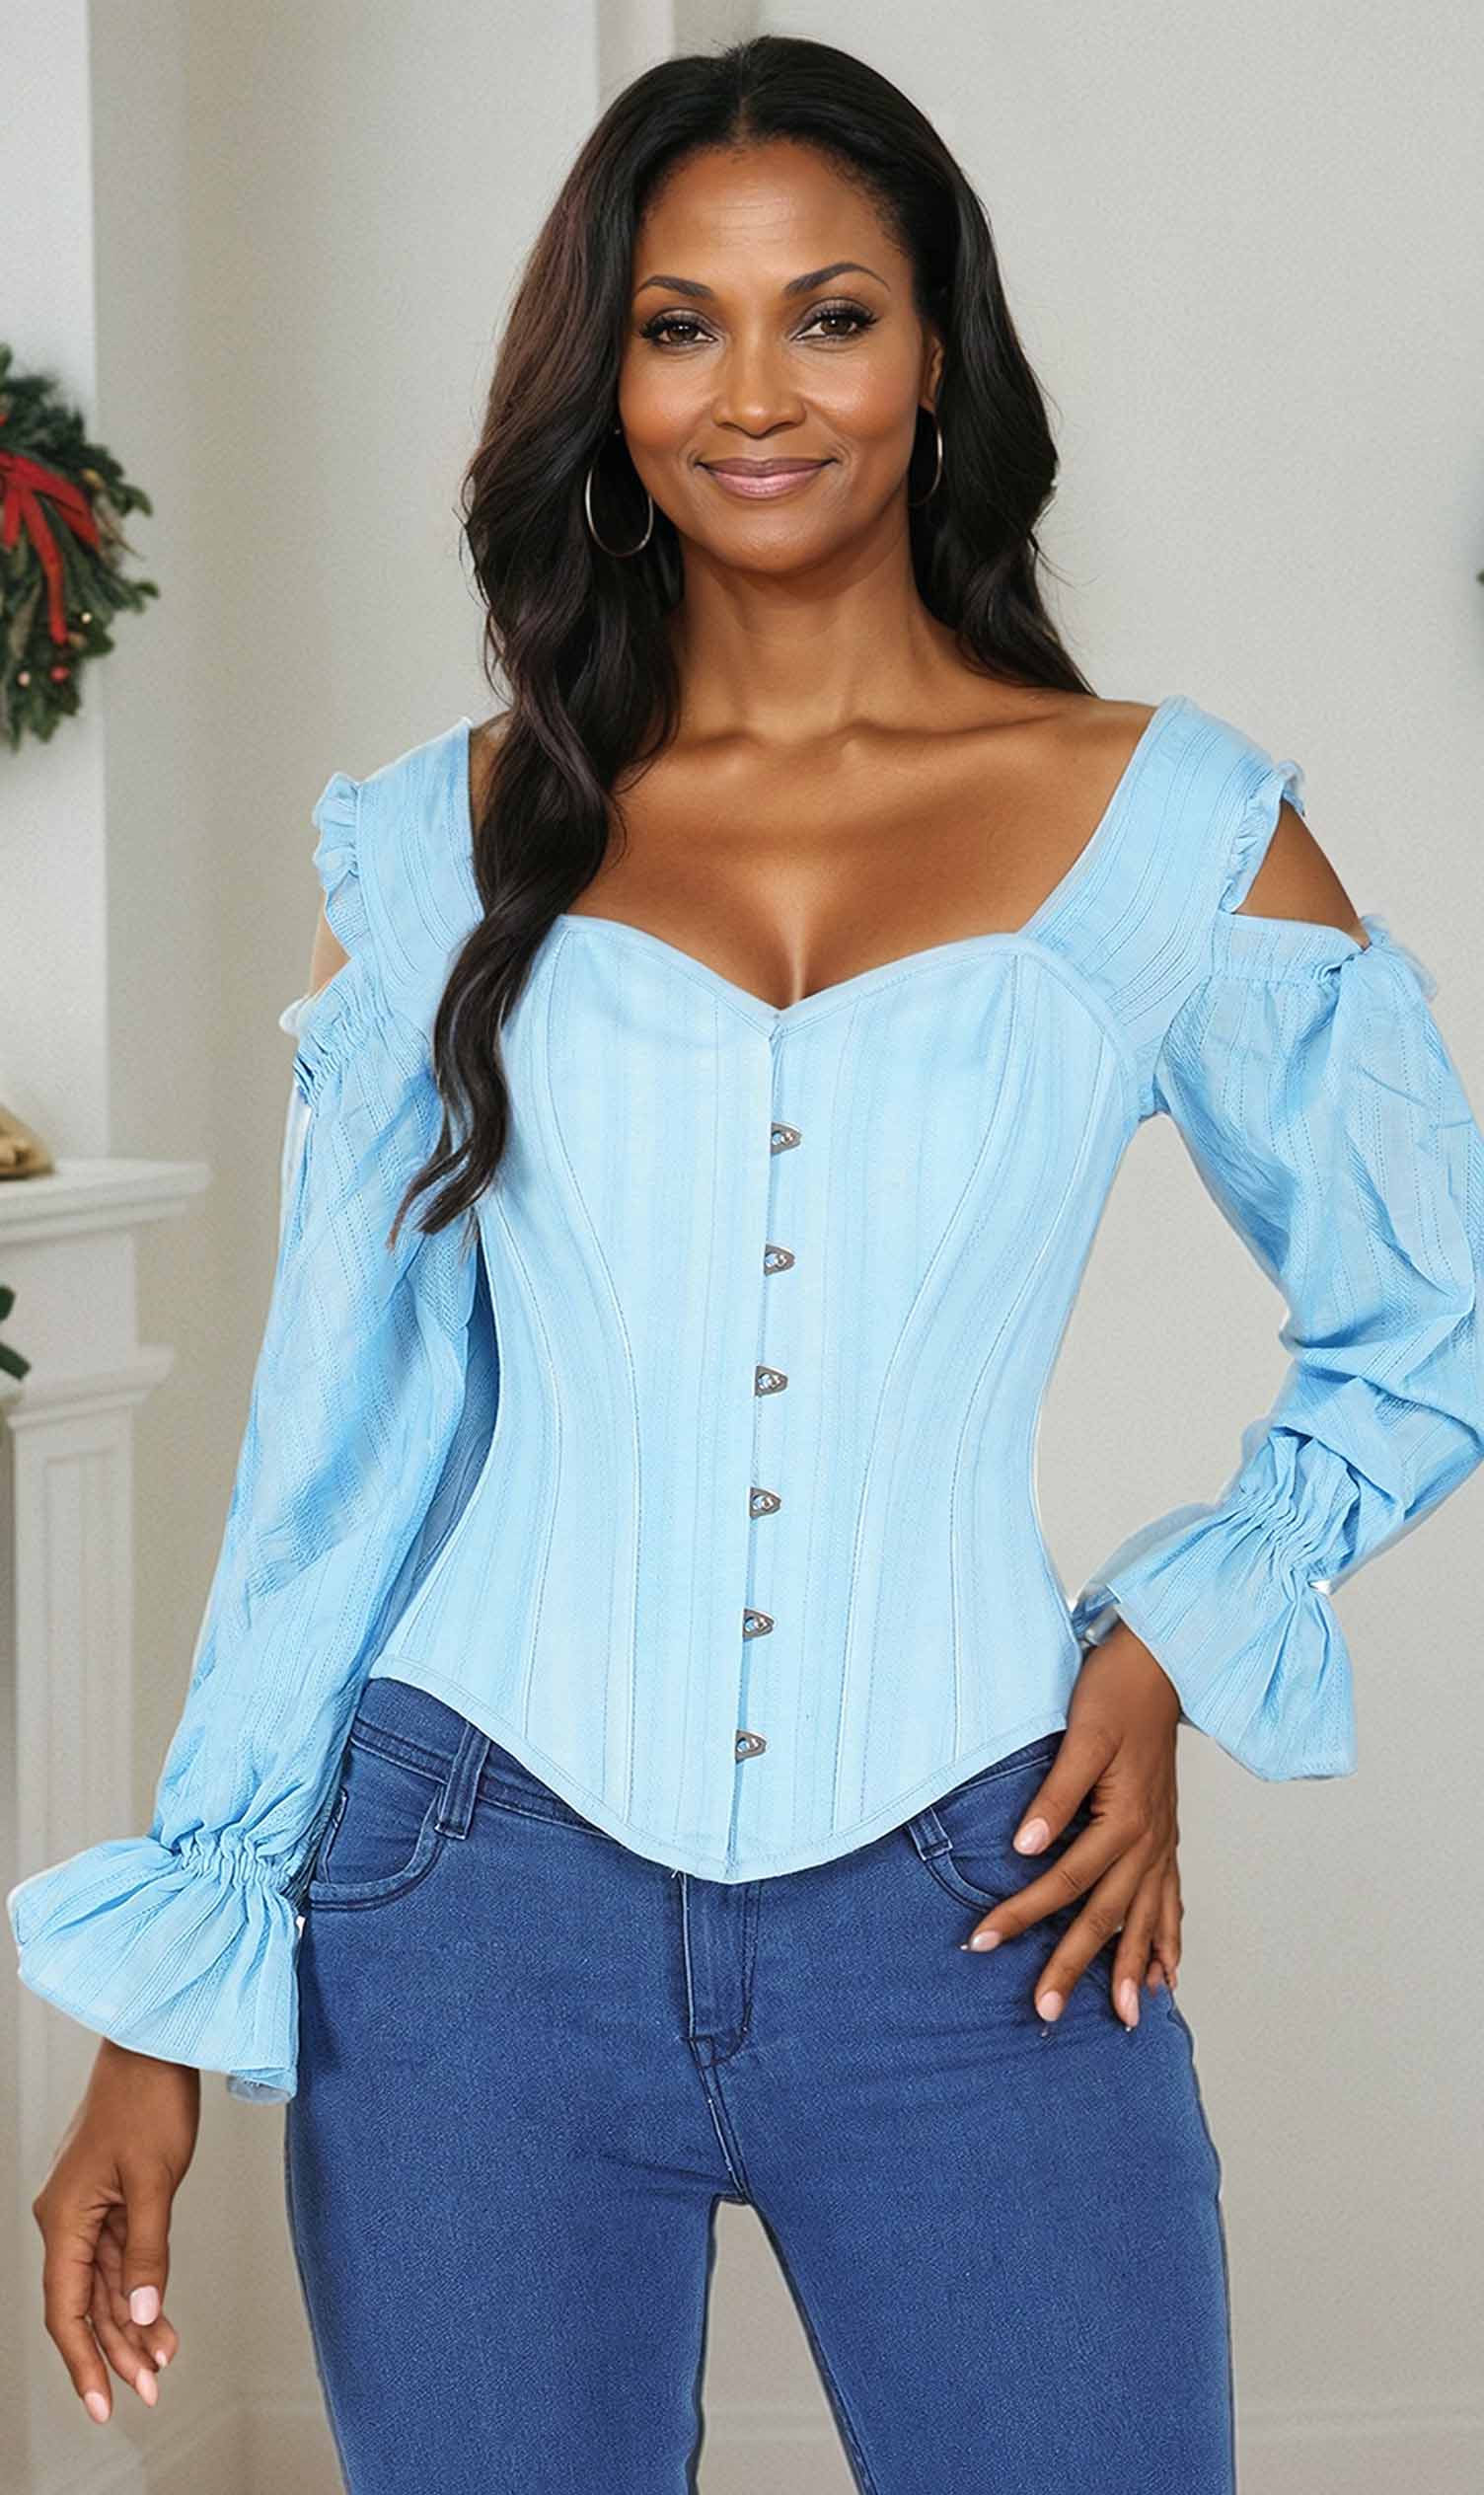 Get good & affordable Overbust corsets. – Bunny Corset